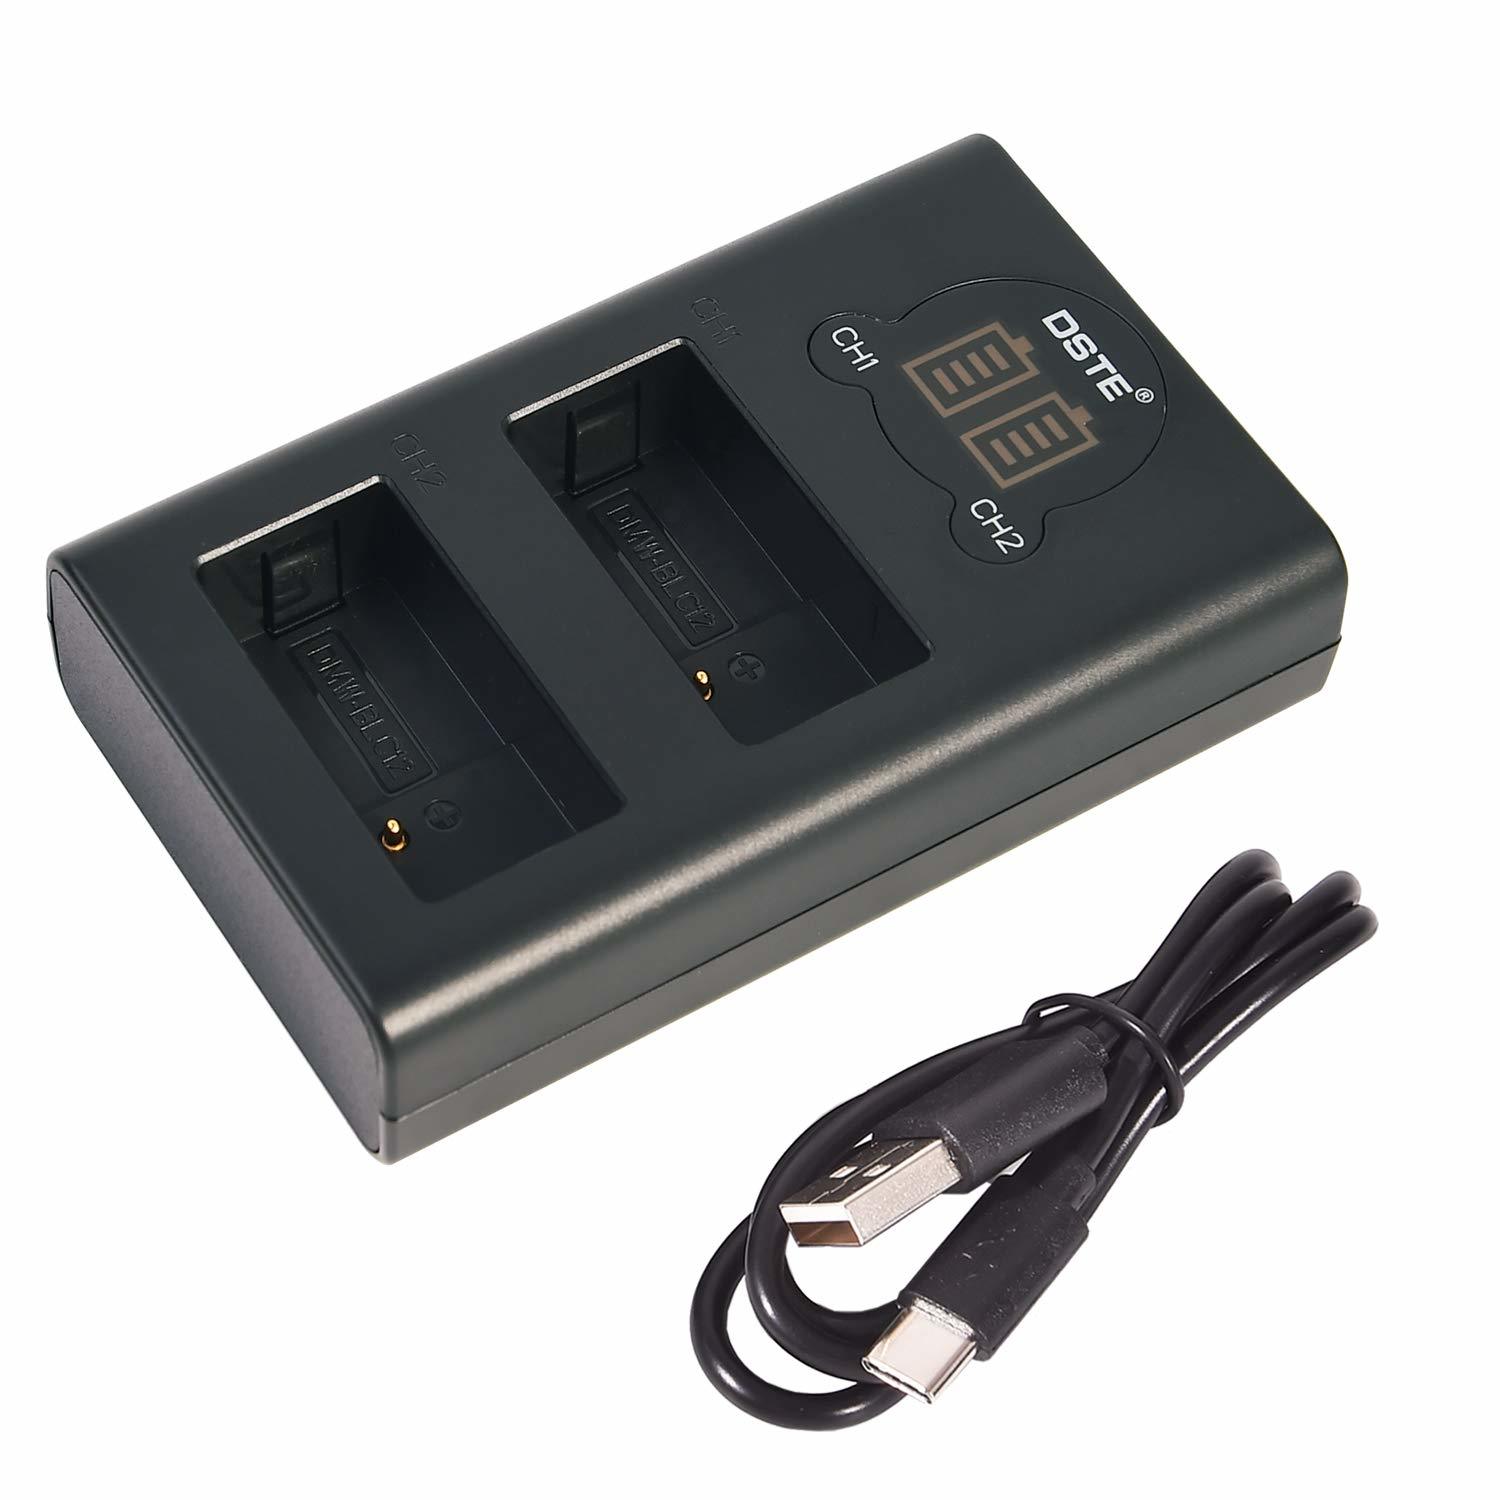 E Replacement For Dual Lcd Battery Charger Compatible Panasonic Dmw-Bl - $25.99